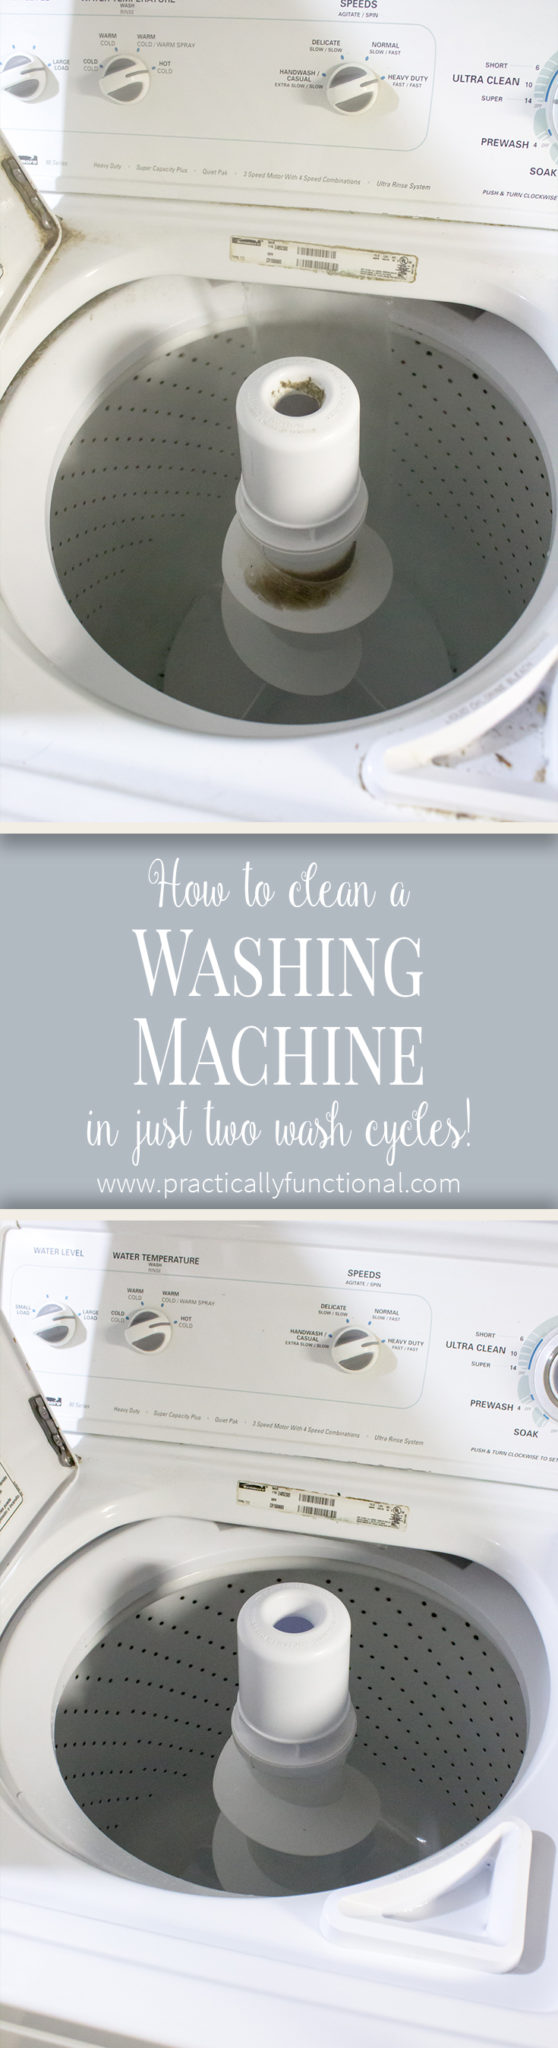 How To Clean A Top Loading Washing Machine With Vinegar And Bleach!